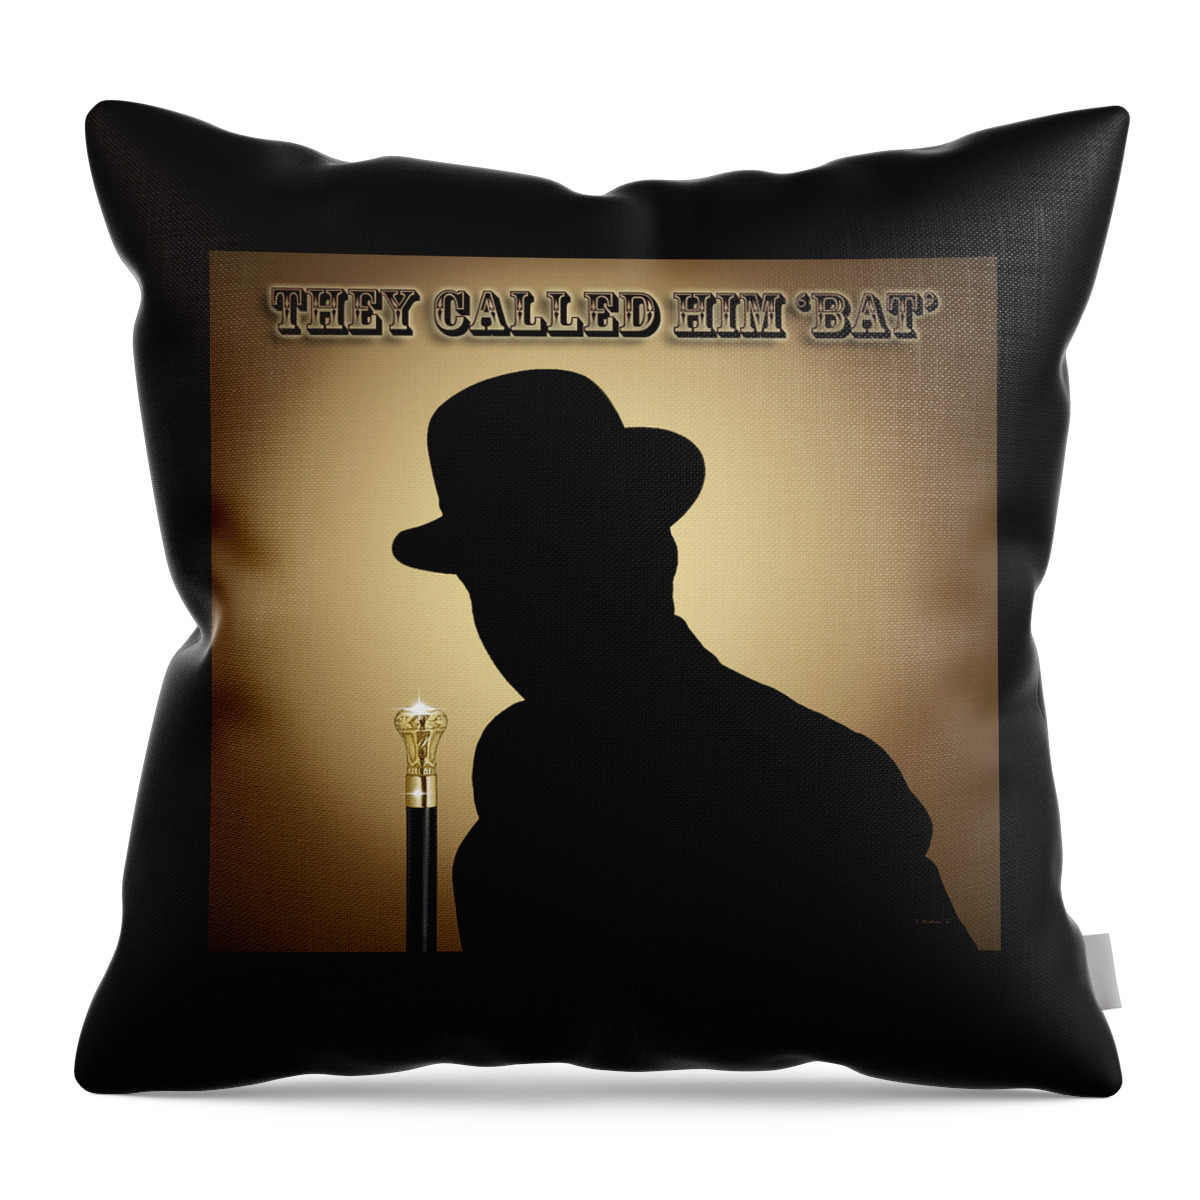 2d Throw Pillow featuring the digital art They Called Him Bat by Brian Wallace